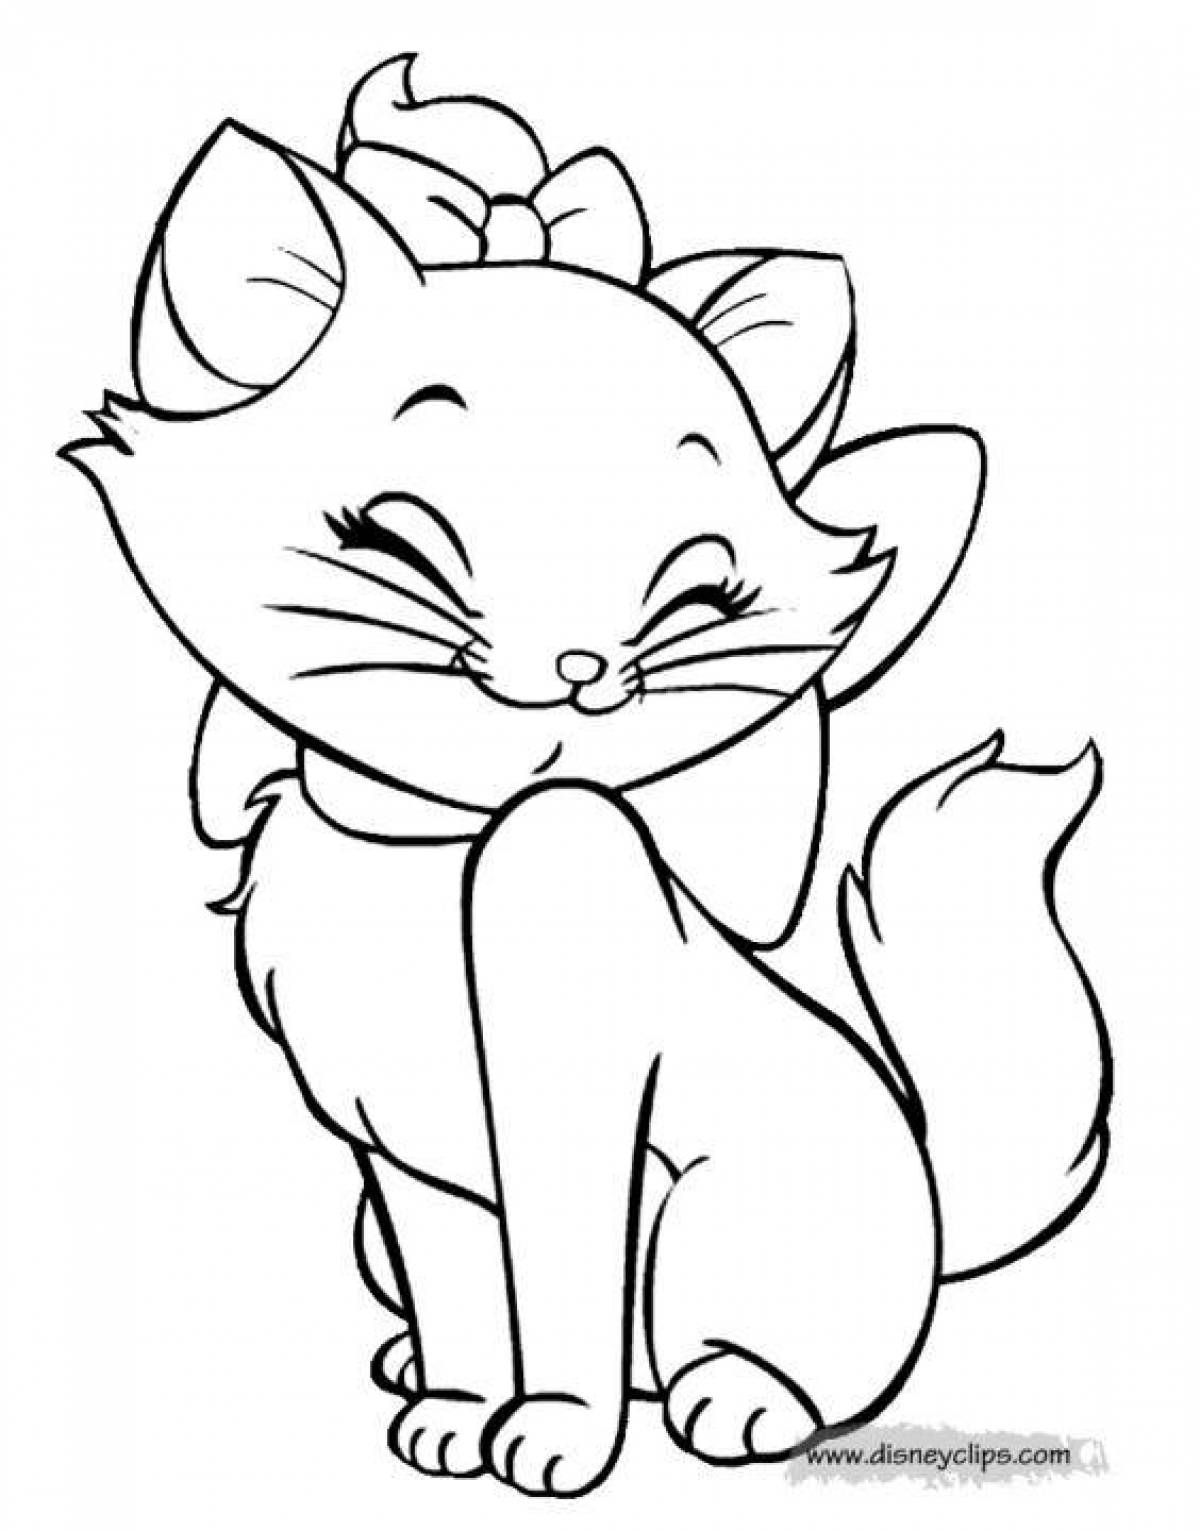 Coloring page playful cat with a bow